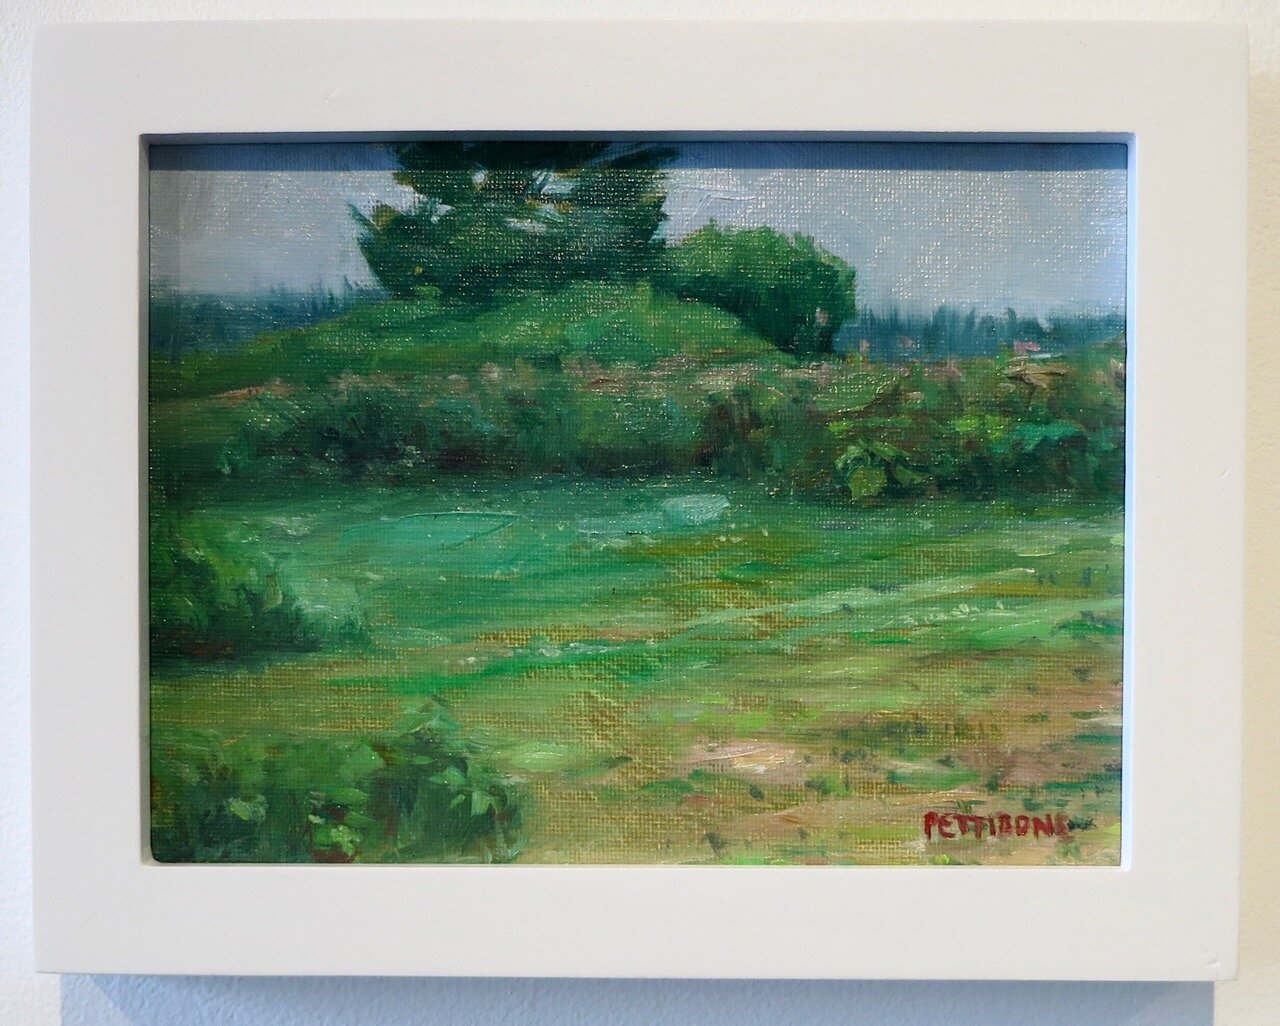    Front Yard, Overcast , 2020   Oil on canvas  6x8 inches 